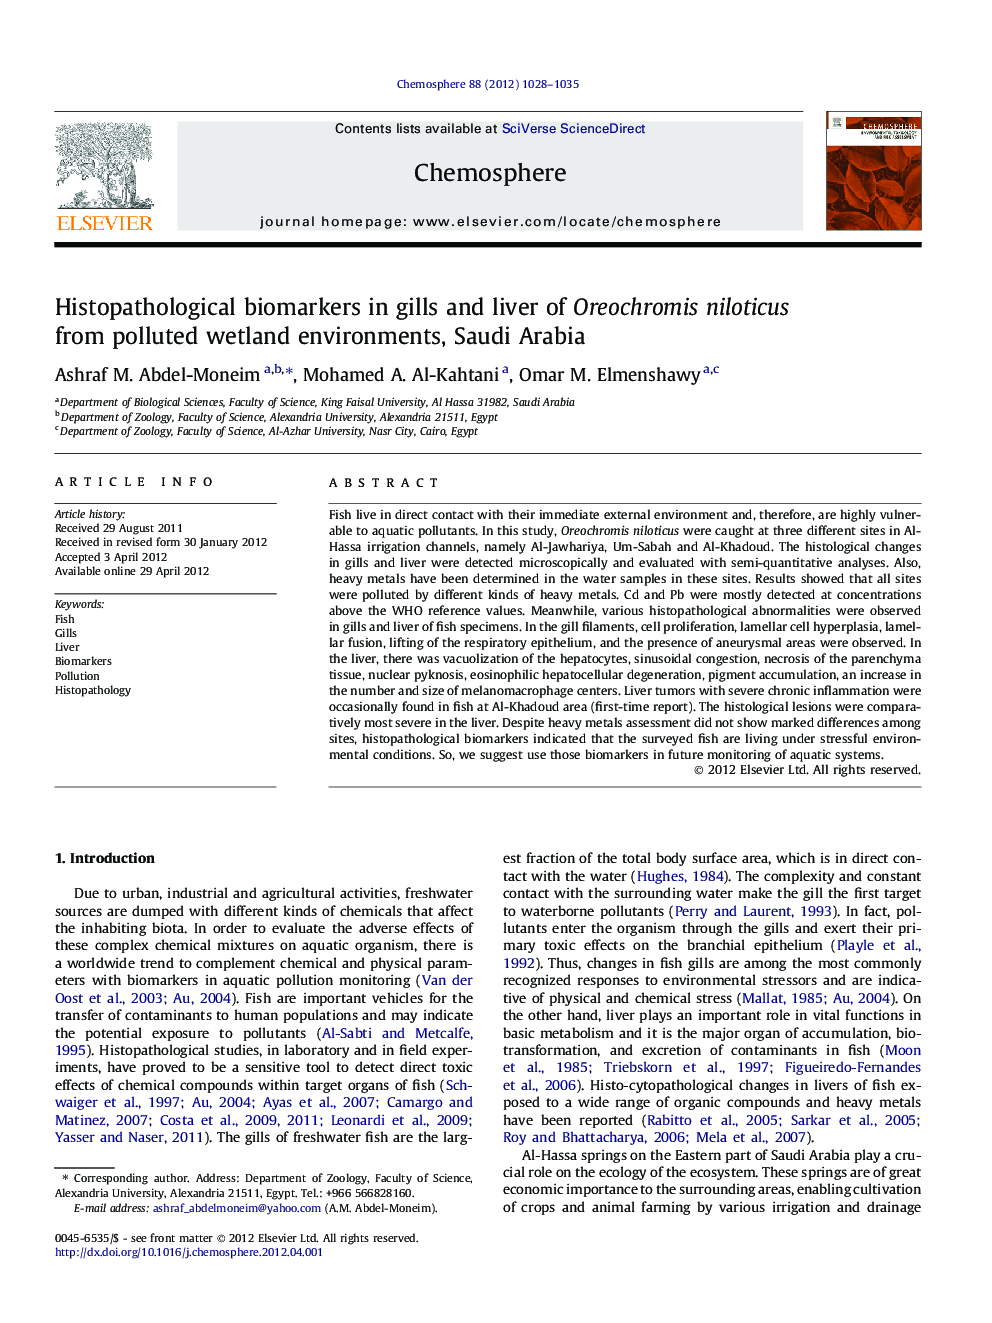 Histopathological biomarkers in gills and liver of Oreochromis niloticus from polluted wetland environments, Saudi Arabia